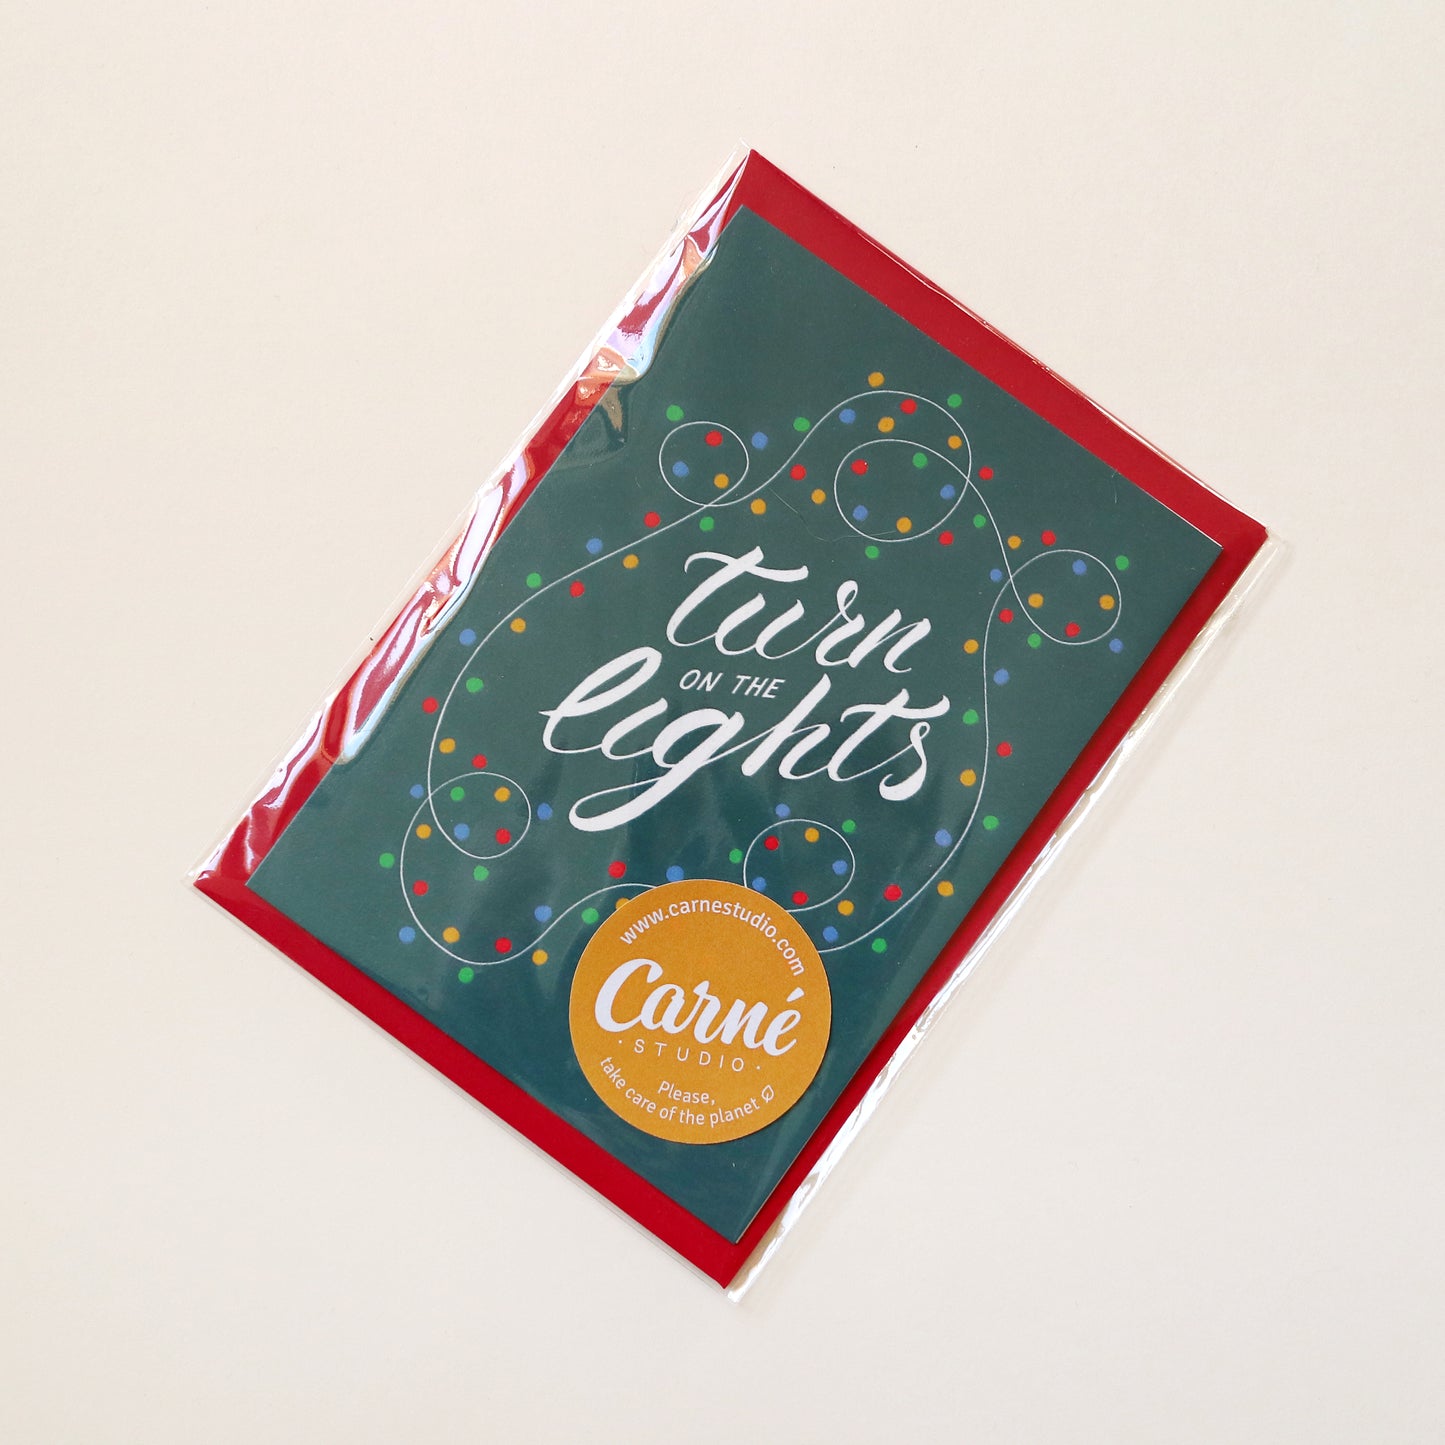 Turn on the lights greeting card